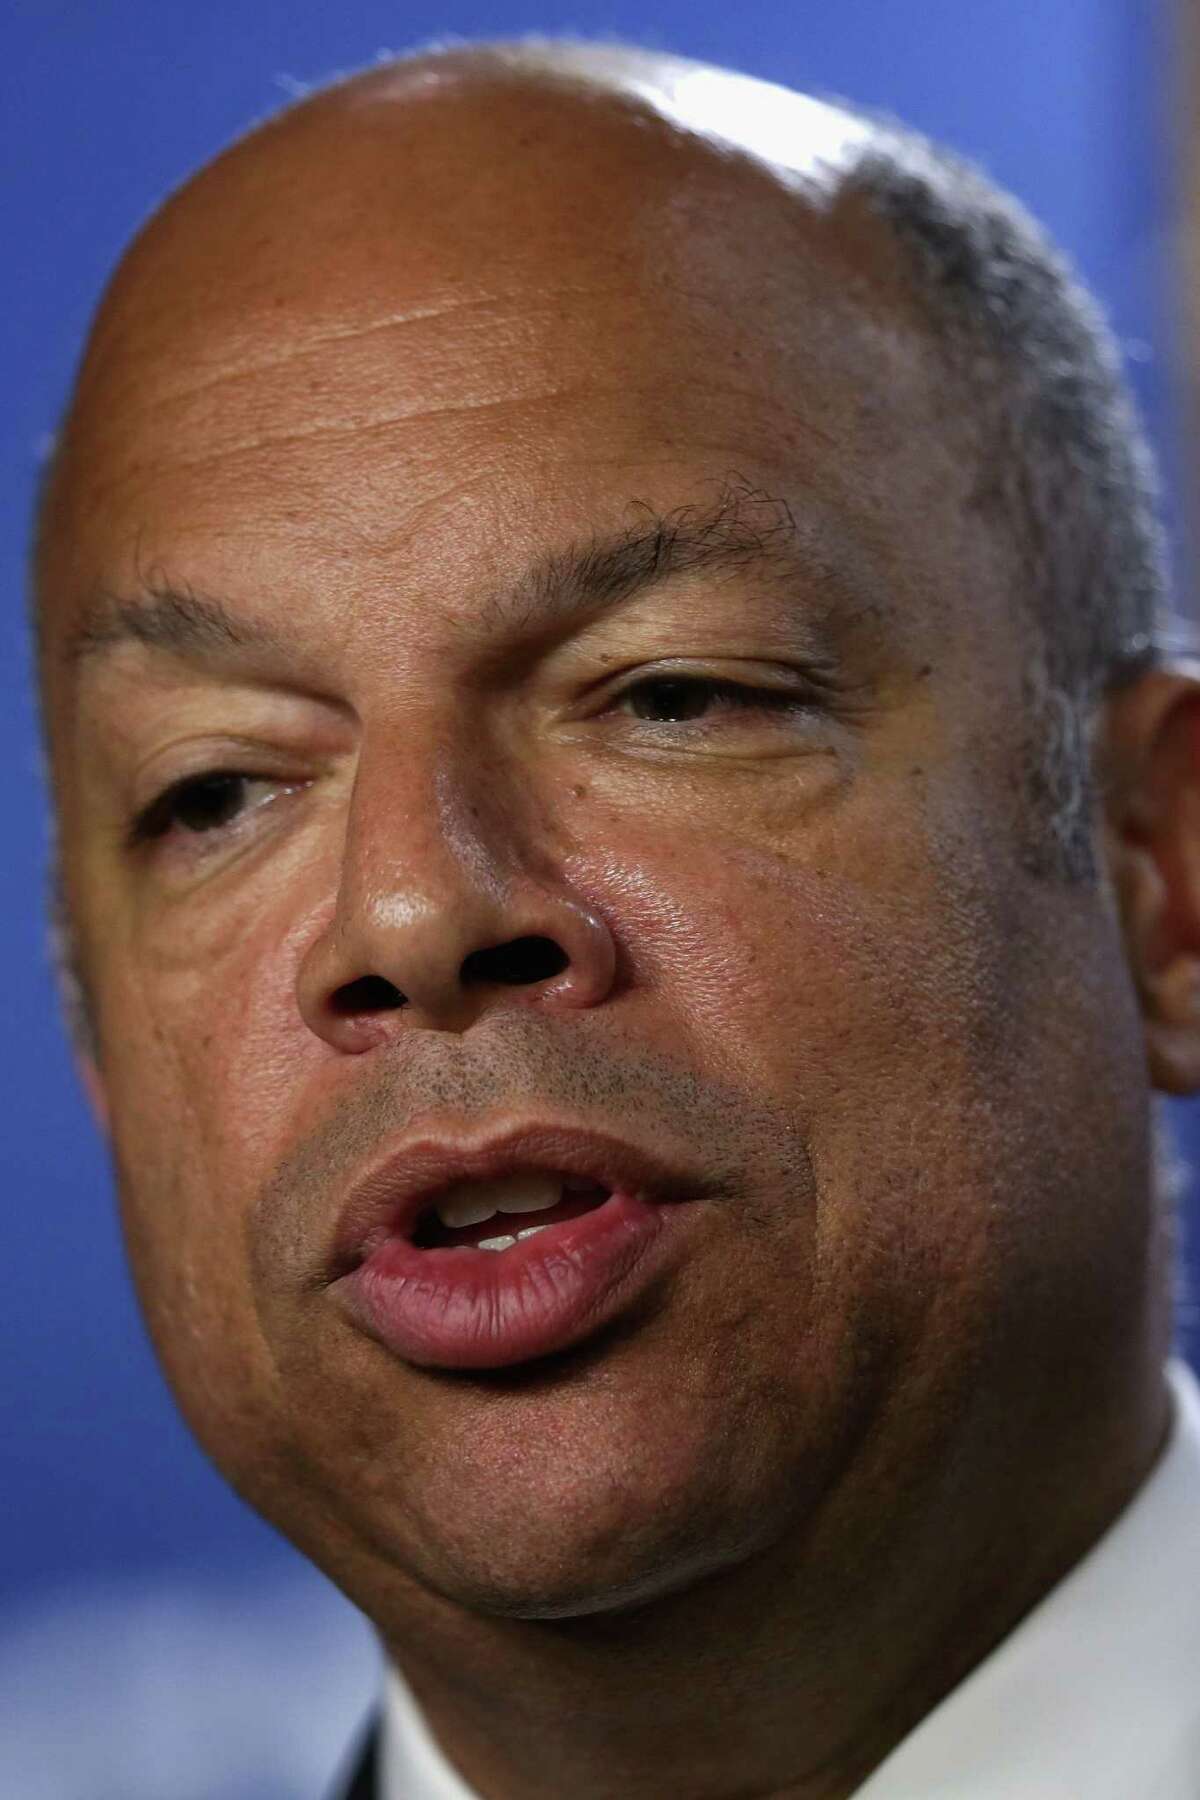 Homeland Security Secretary Jeh Johnson said Congress must act on funding for the surge.